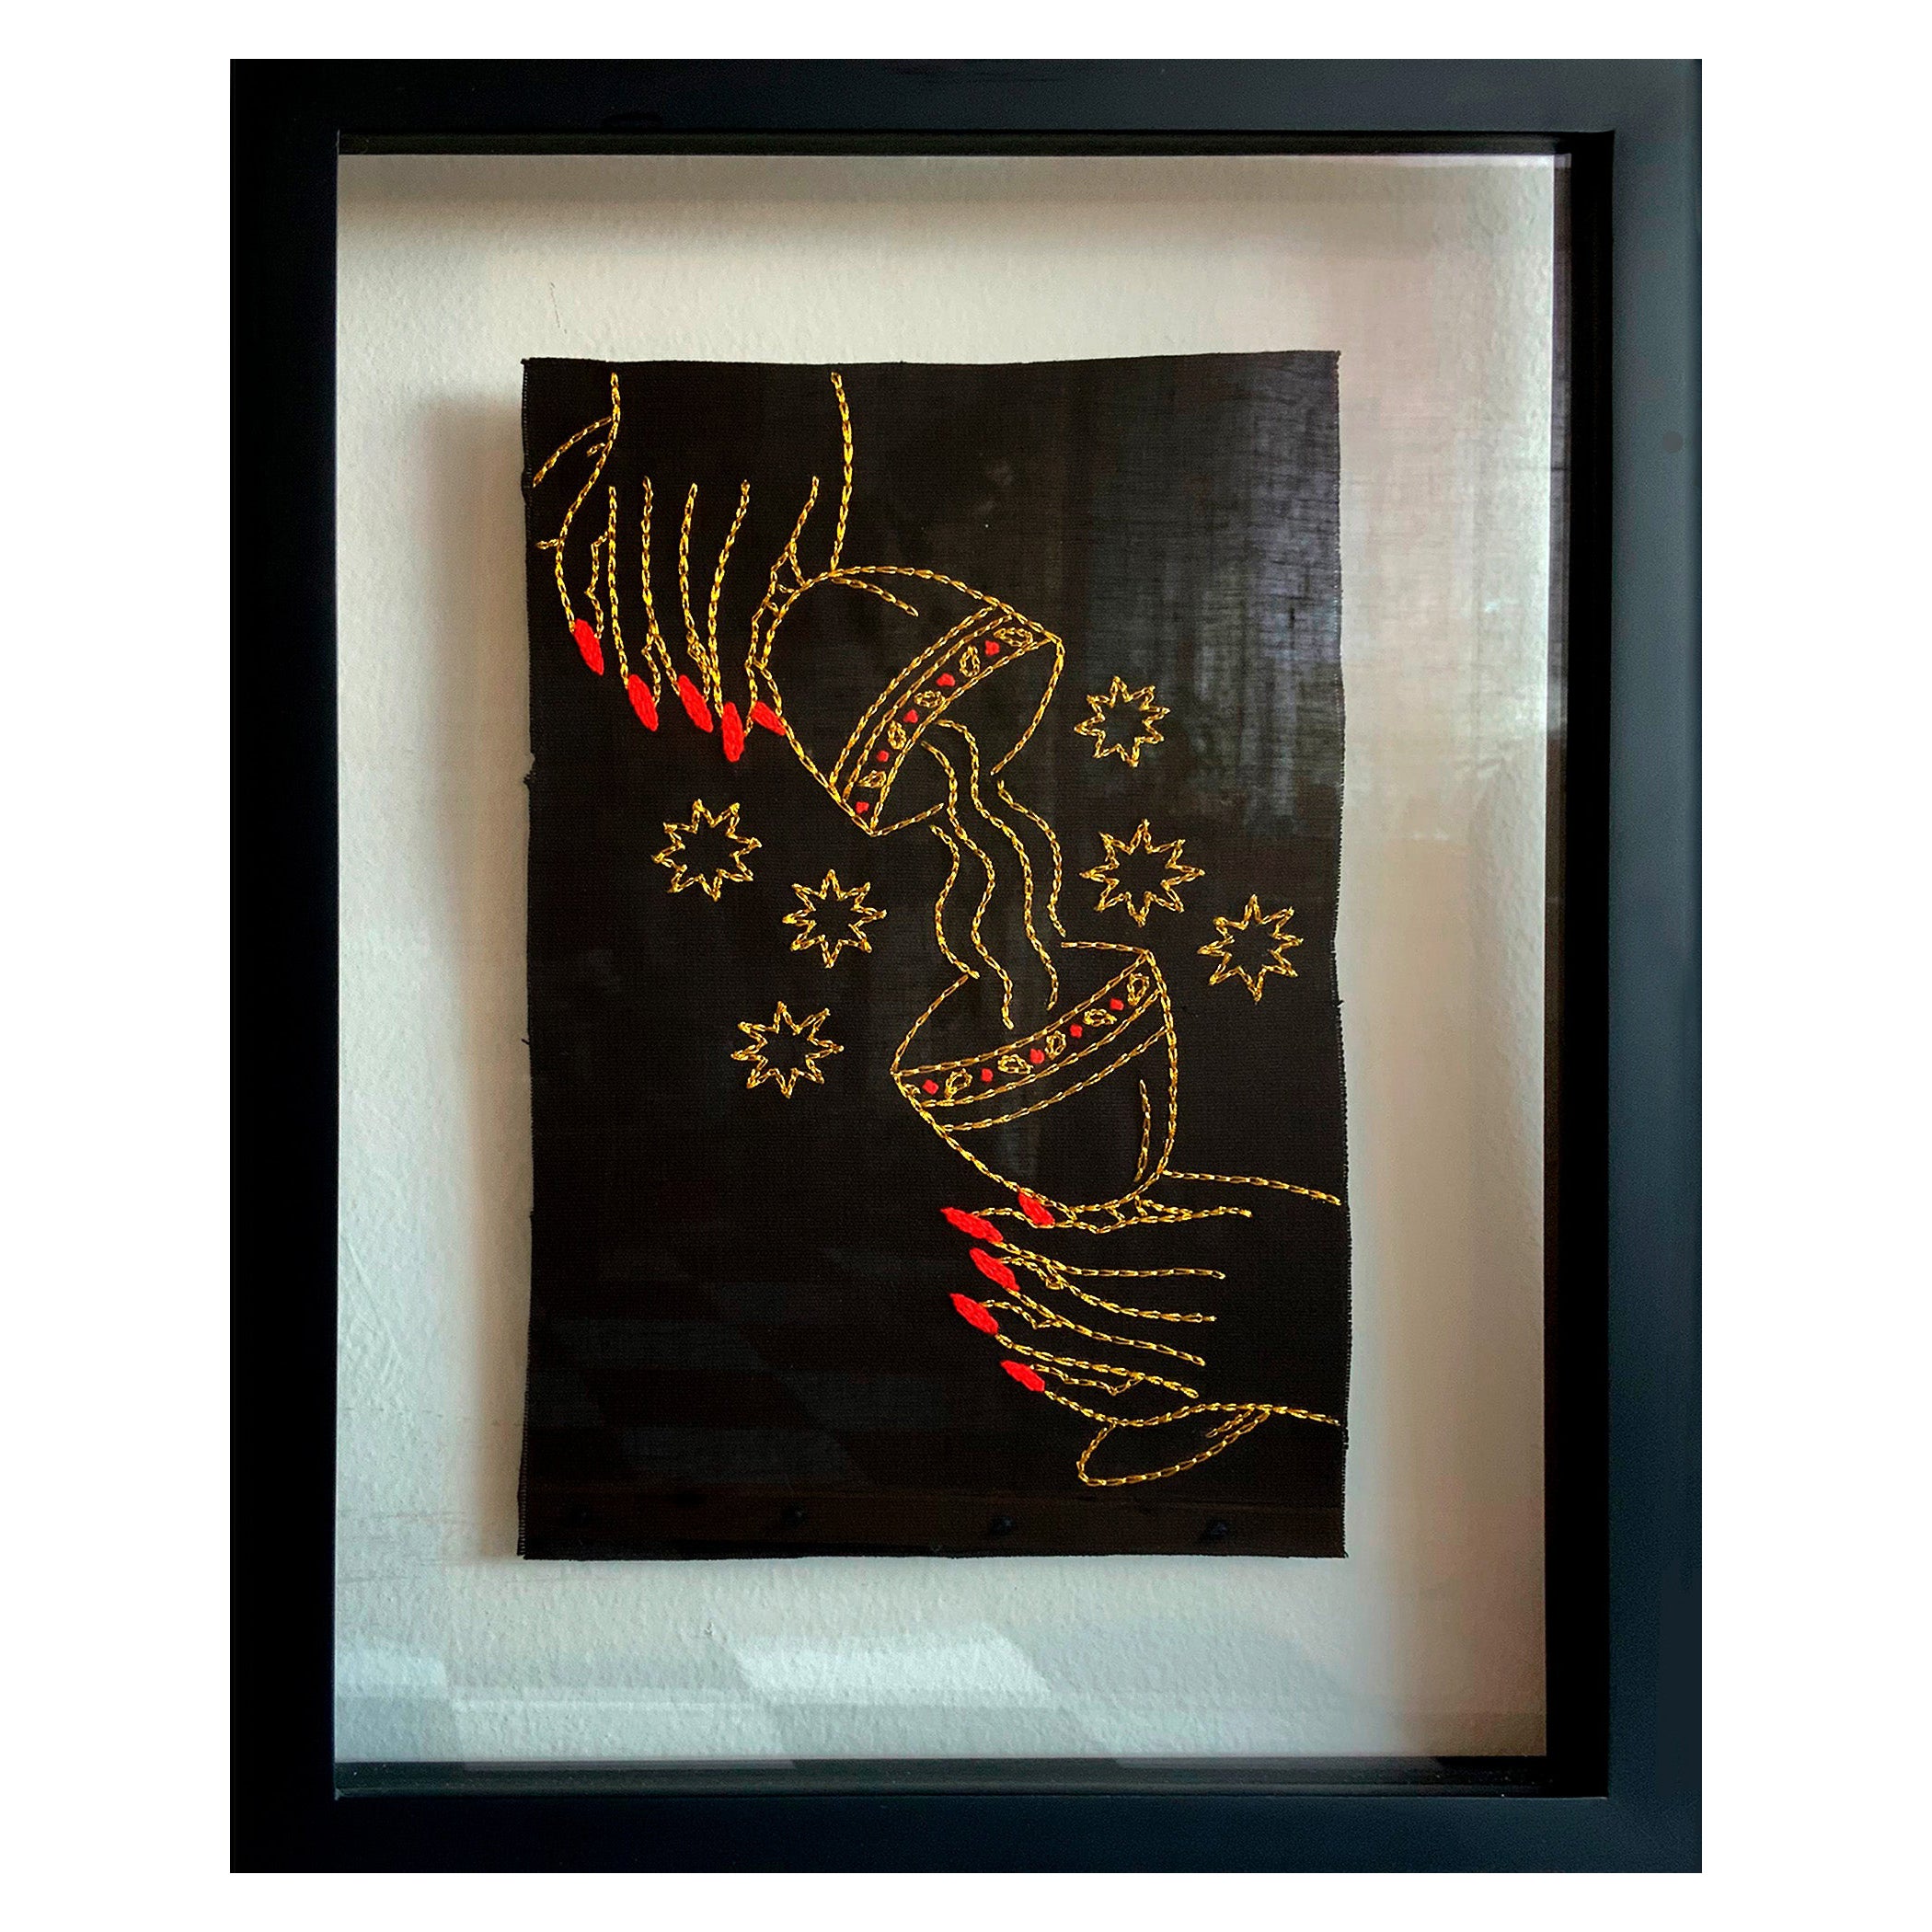 La Templanza. From The Ventura Series.  Embroidery thread on canvas. Framed For Sale